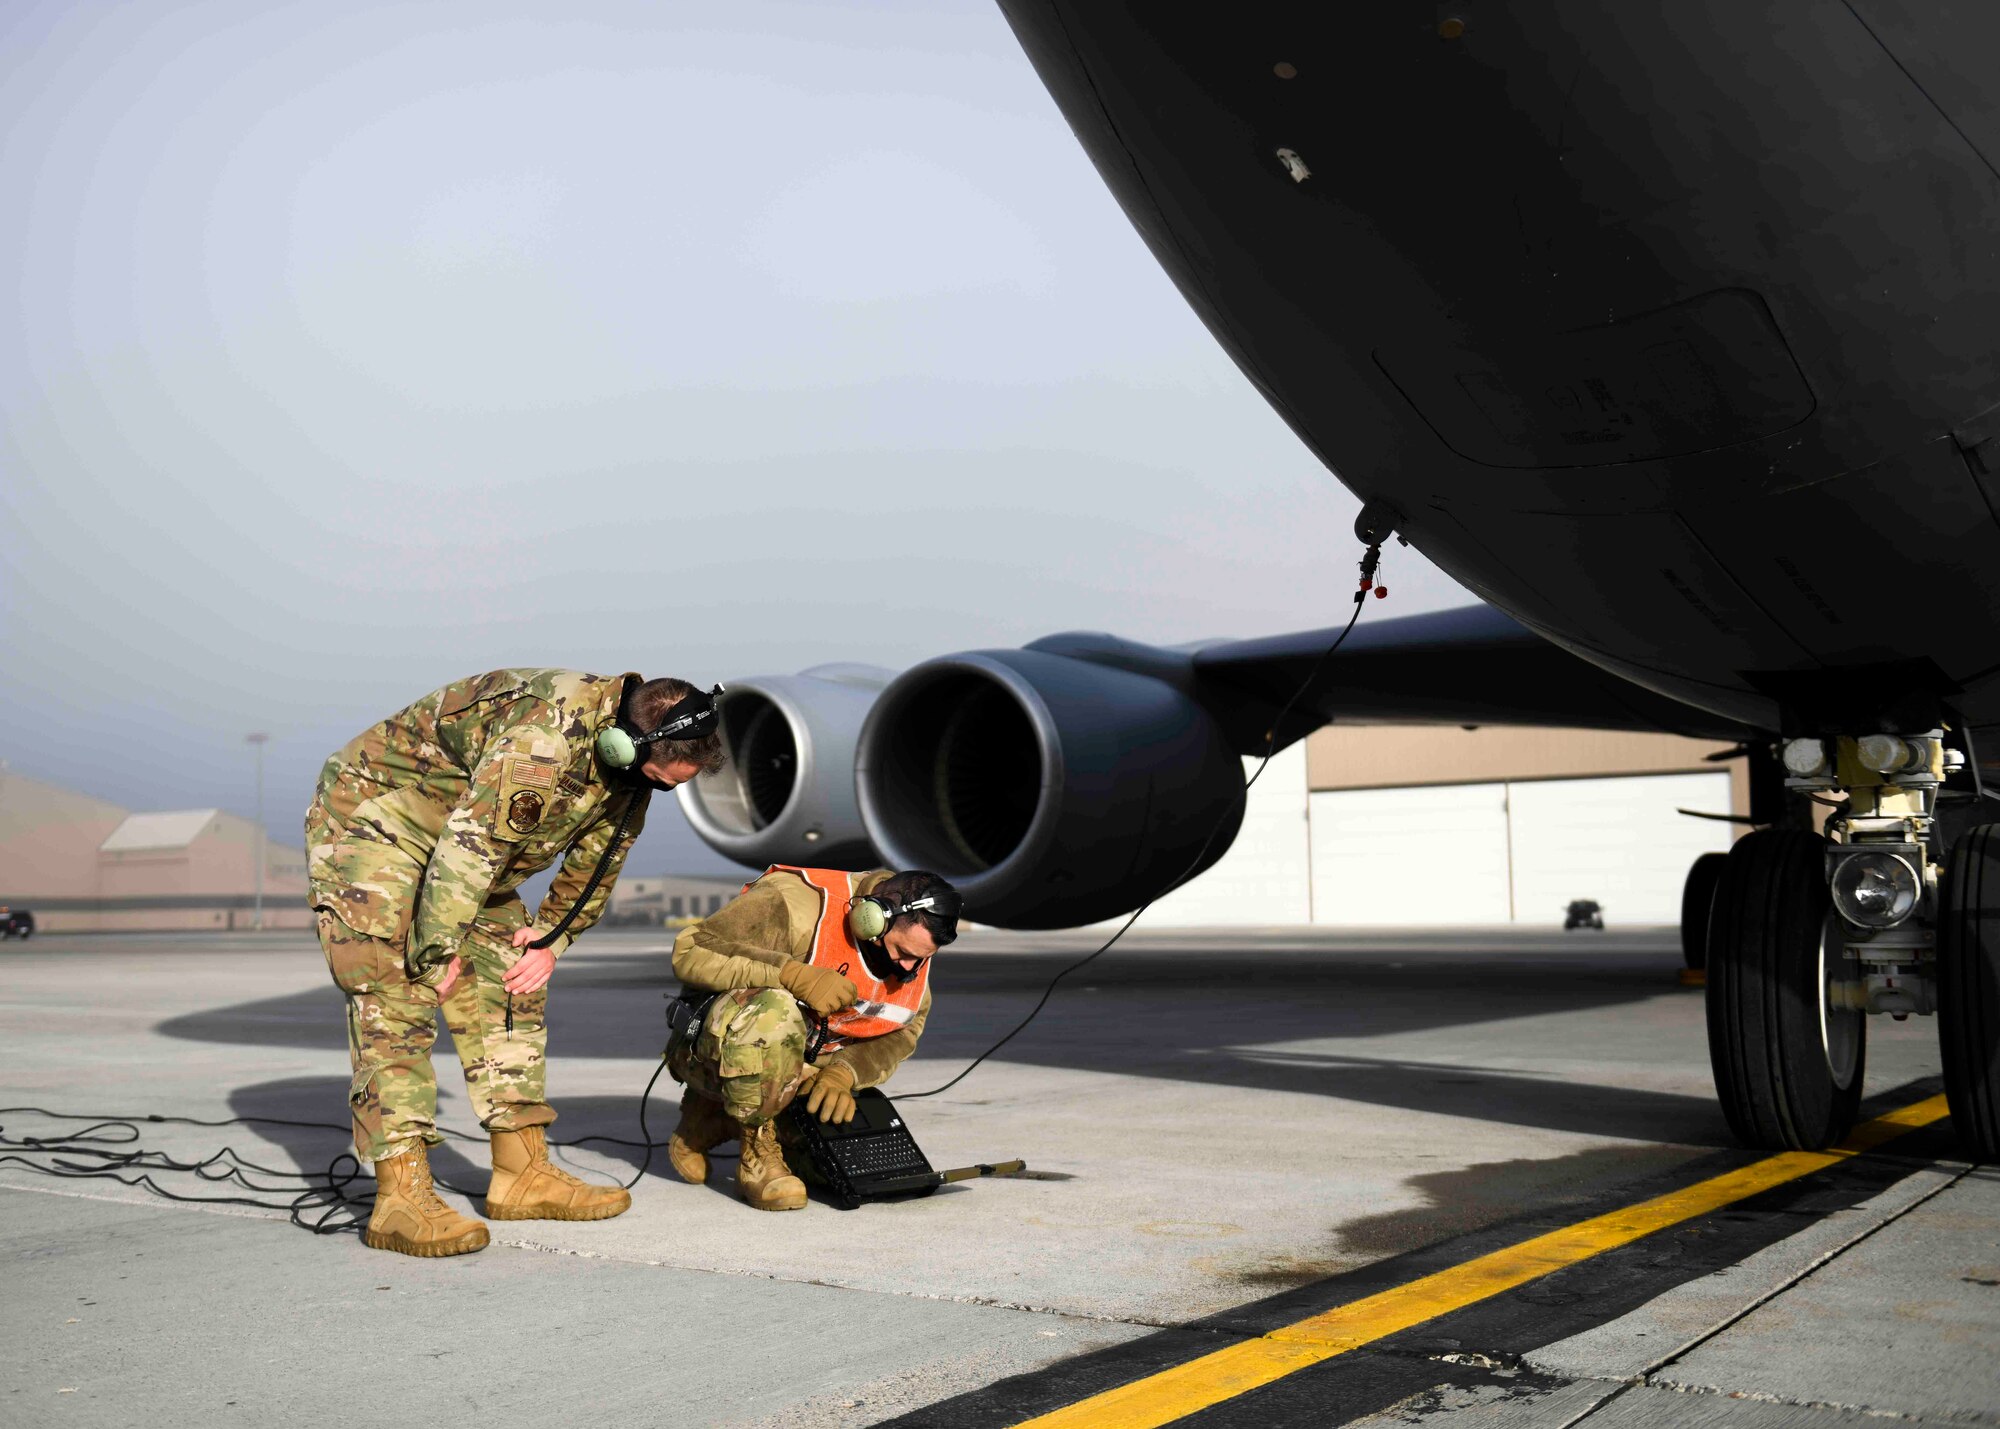 Airmen from the 92nd Maintenance Squadron read through a technical order prior to performing hot refueling on a KC-135 Stratotanker on Fairchild Air Force Base, Washington, March 25, 2021. Hot pit refueling requires cohesiveness between several key players on base, including but not limited to the 92nd Logistics Readiness Squadron, the 92nd MXS, and several air refueling squadrons. (U.S. Air Force photo by Airman 1st Class Kiaundra Miller)